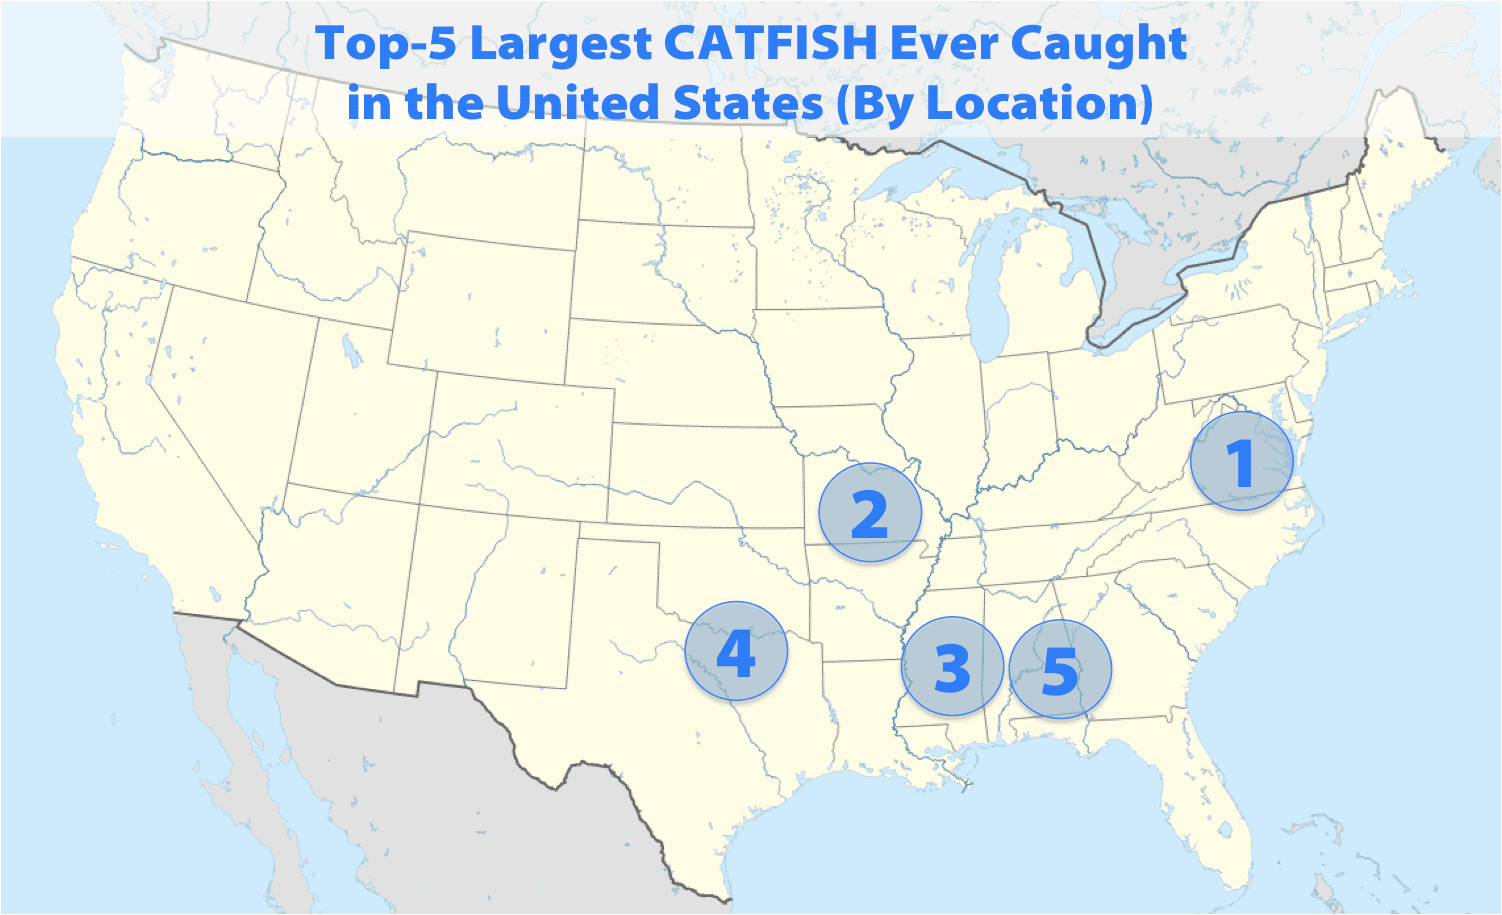 map of the US showing where the 5 biggest catfish were caught